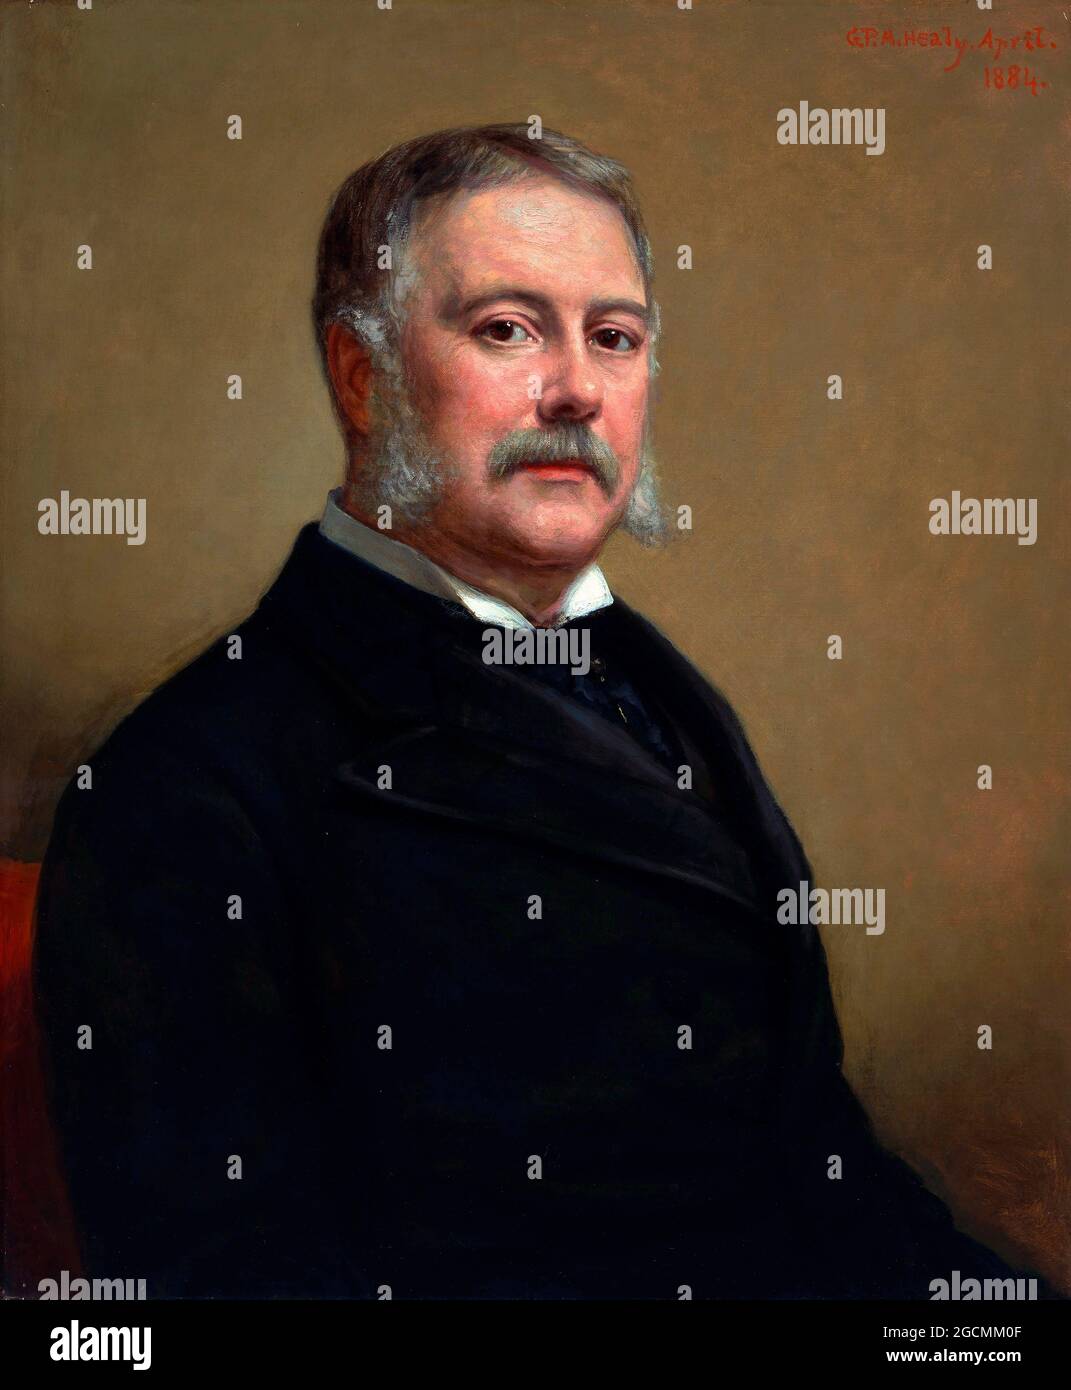 Chester Arthur. Portrait of the 21st US President Chester A Arthur (1830-1886) by George Peter Alexander Healy, oil on canvas, 1884 Stock Photo